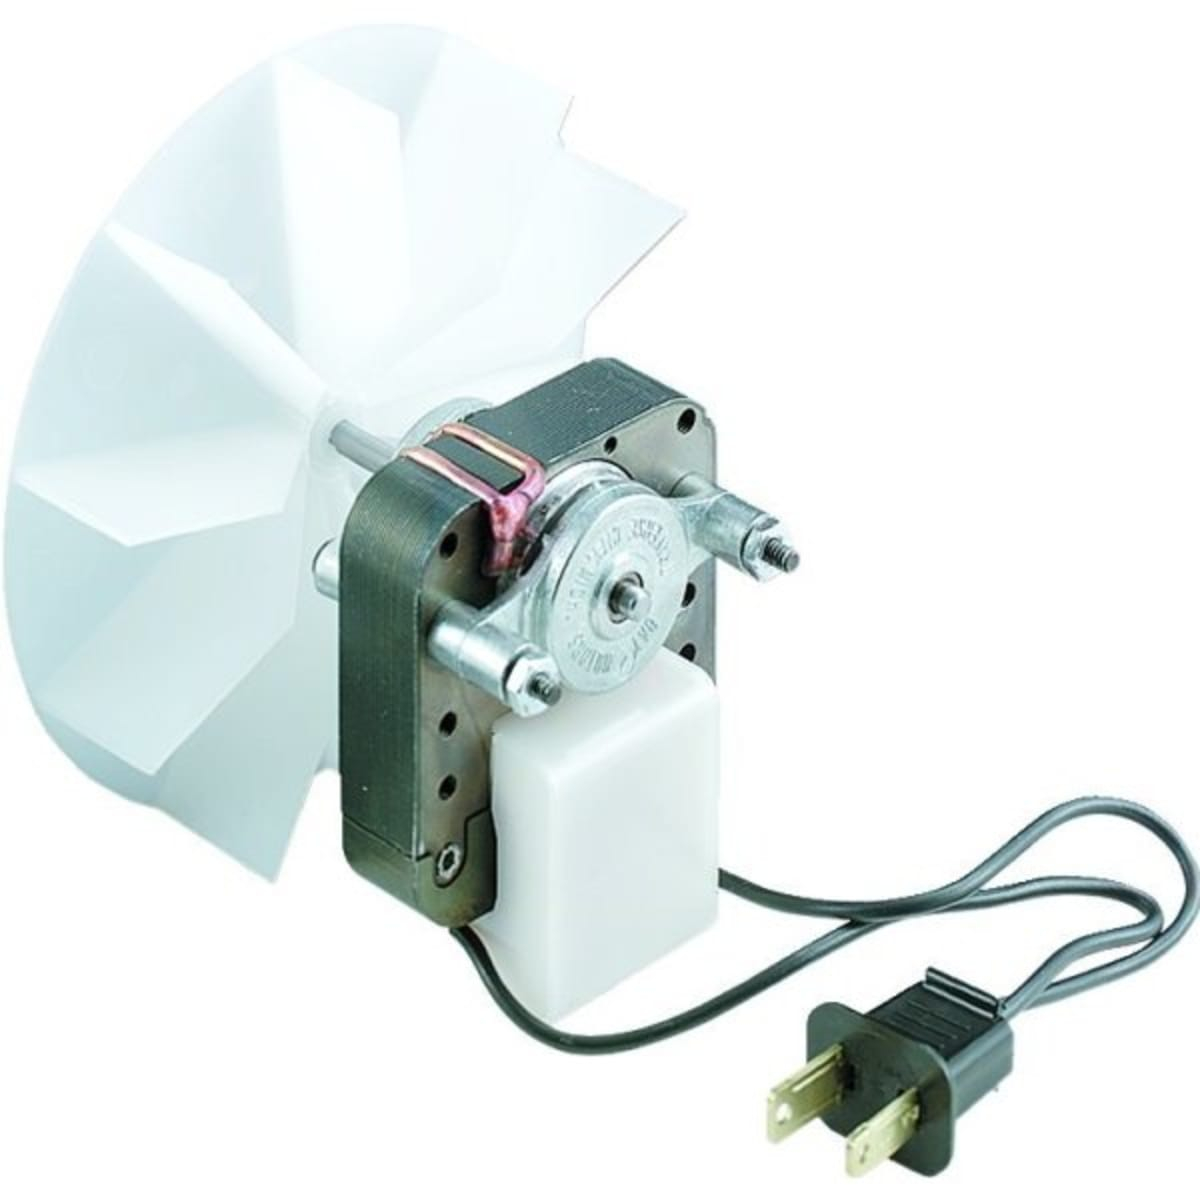 Exhaust Motor And Fan Assembly Package Of 2 Hd Supply pertaining to measurements 1200 X 1200